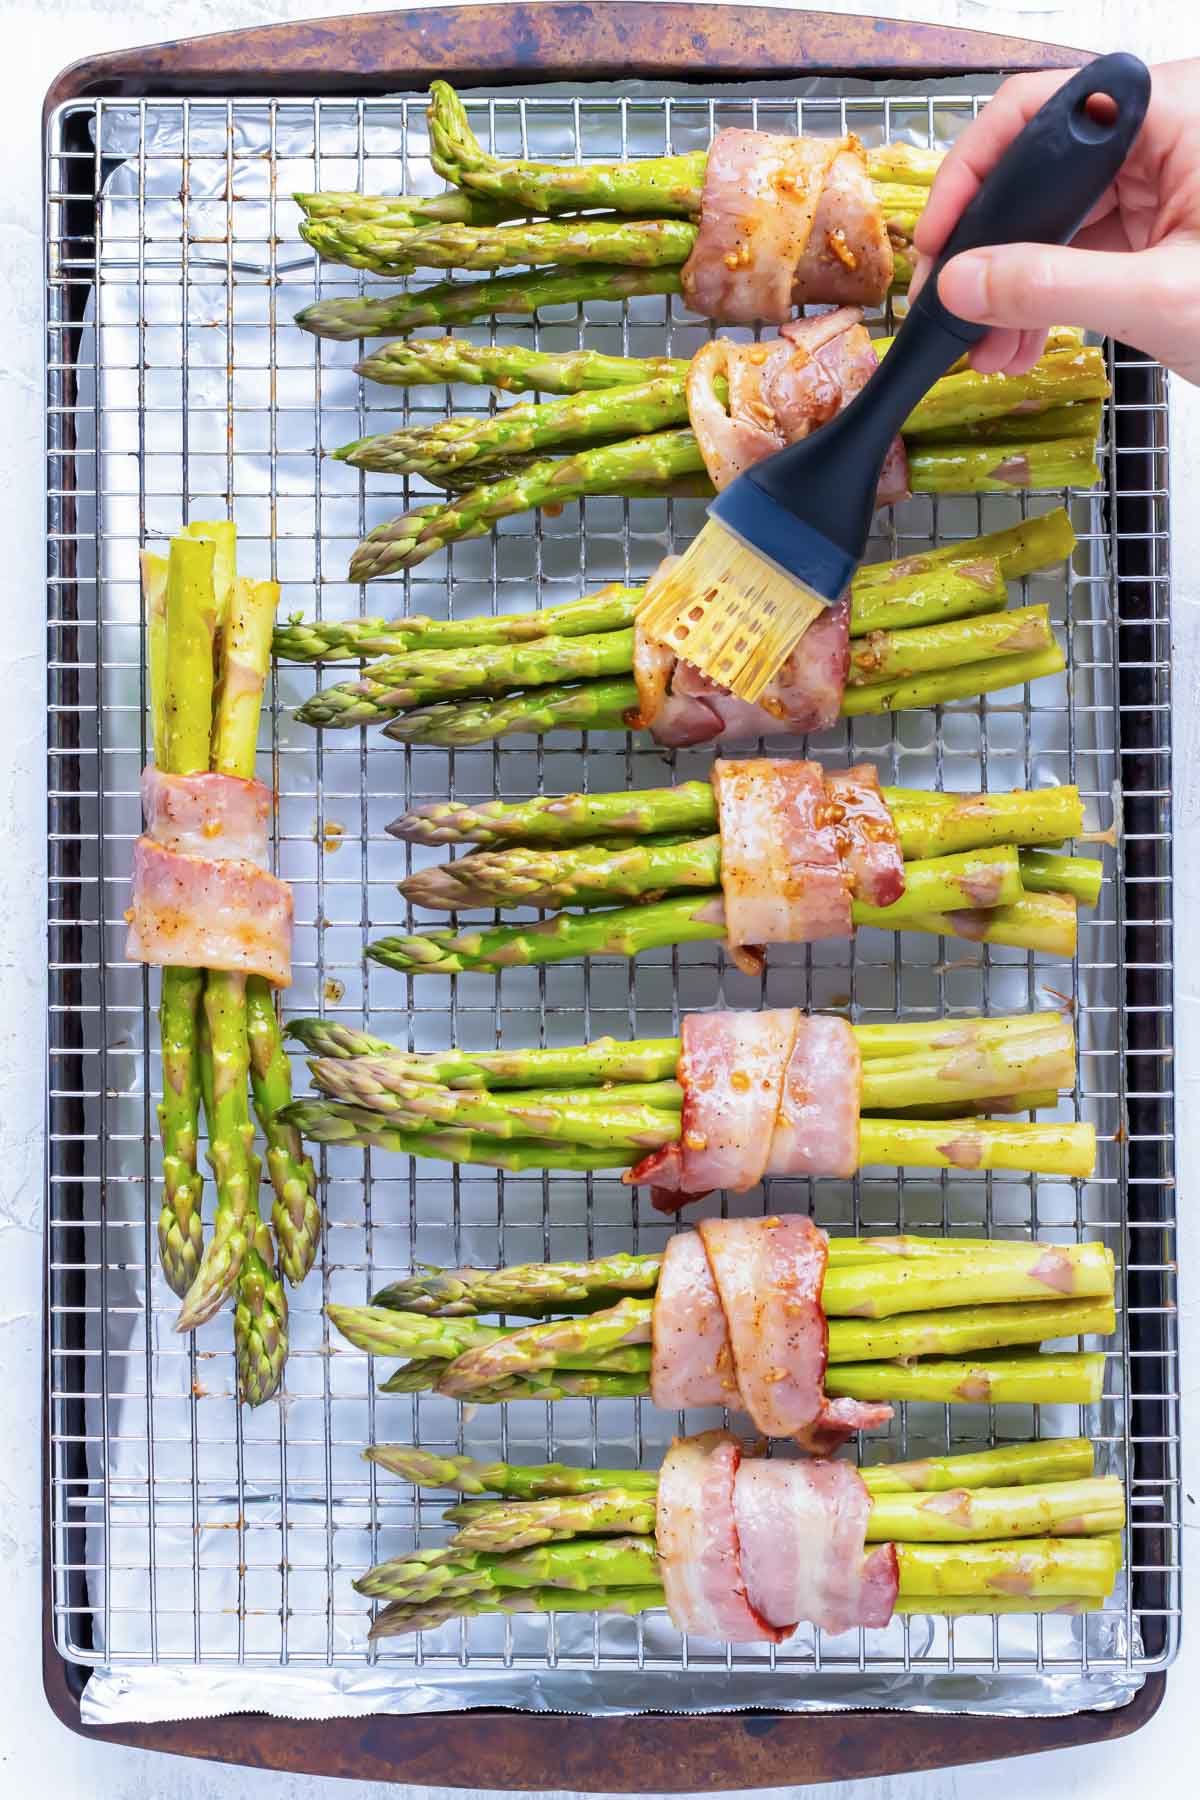 Garlic and butter sauce being brushed over bacon wrapped asparagus on a wire rack and baking sheet.